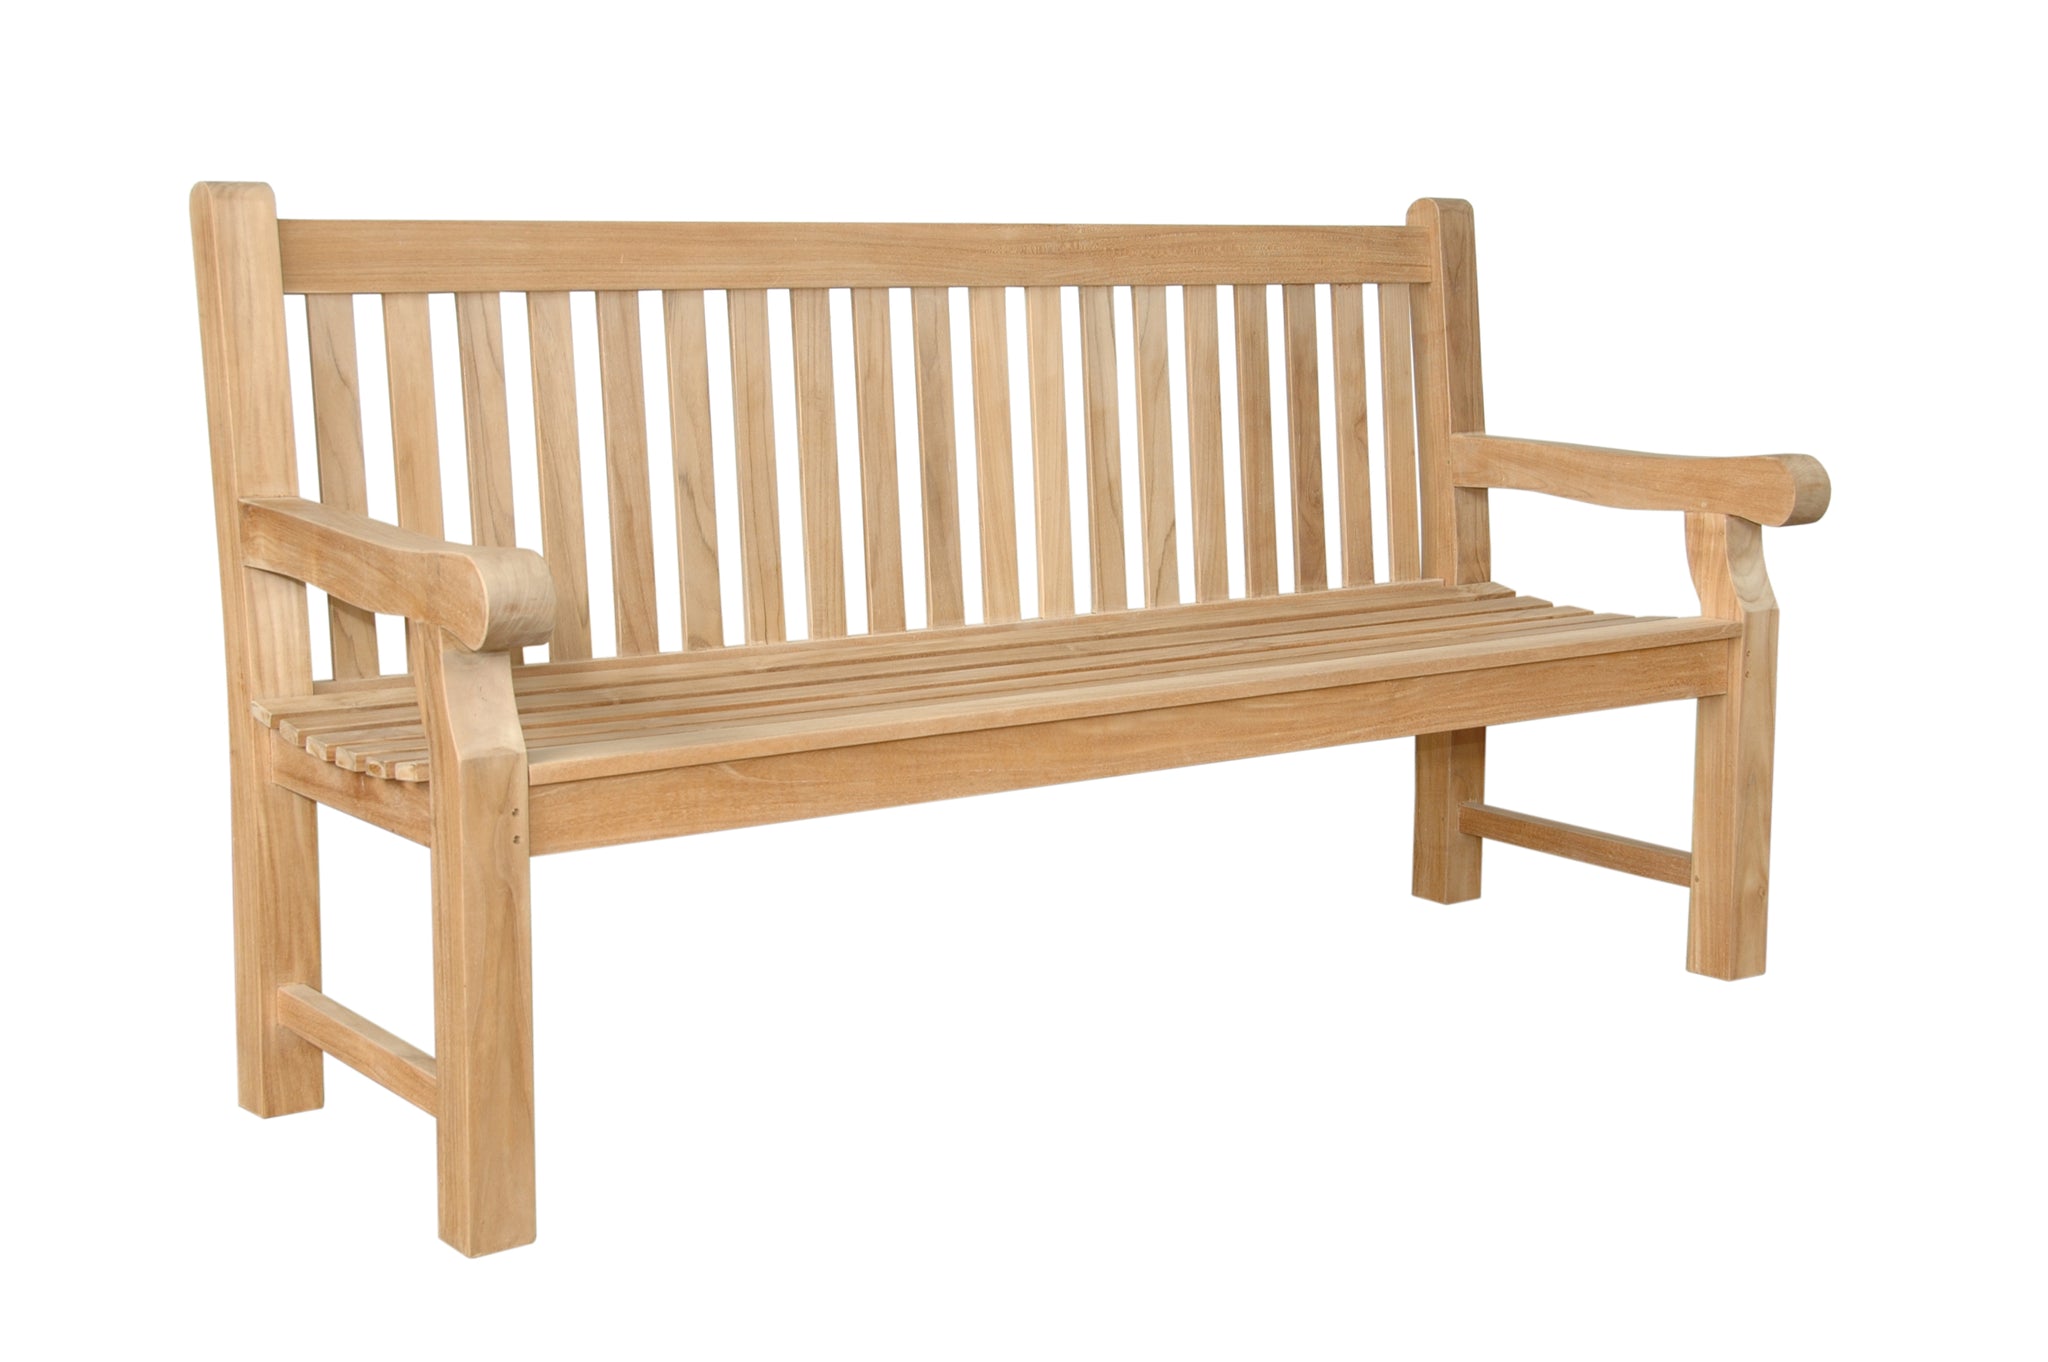 Anderson Teak Devonshire 4-Seater Extra Thick Bench BH-706S